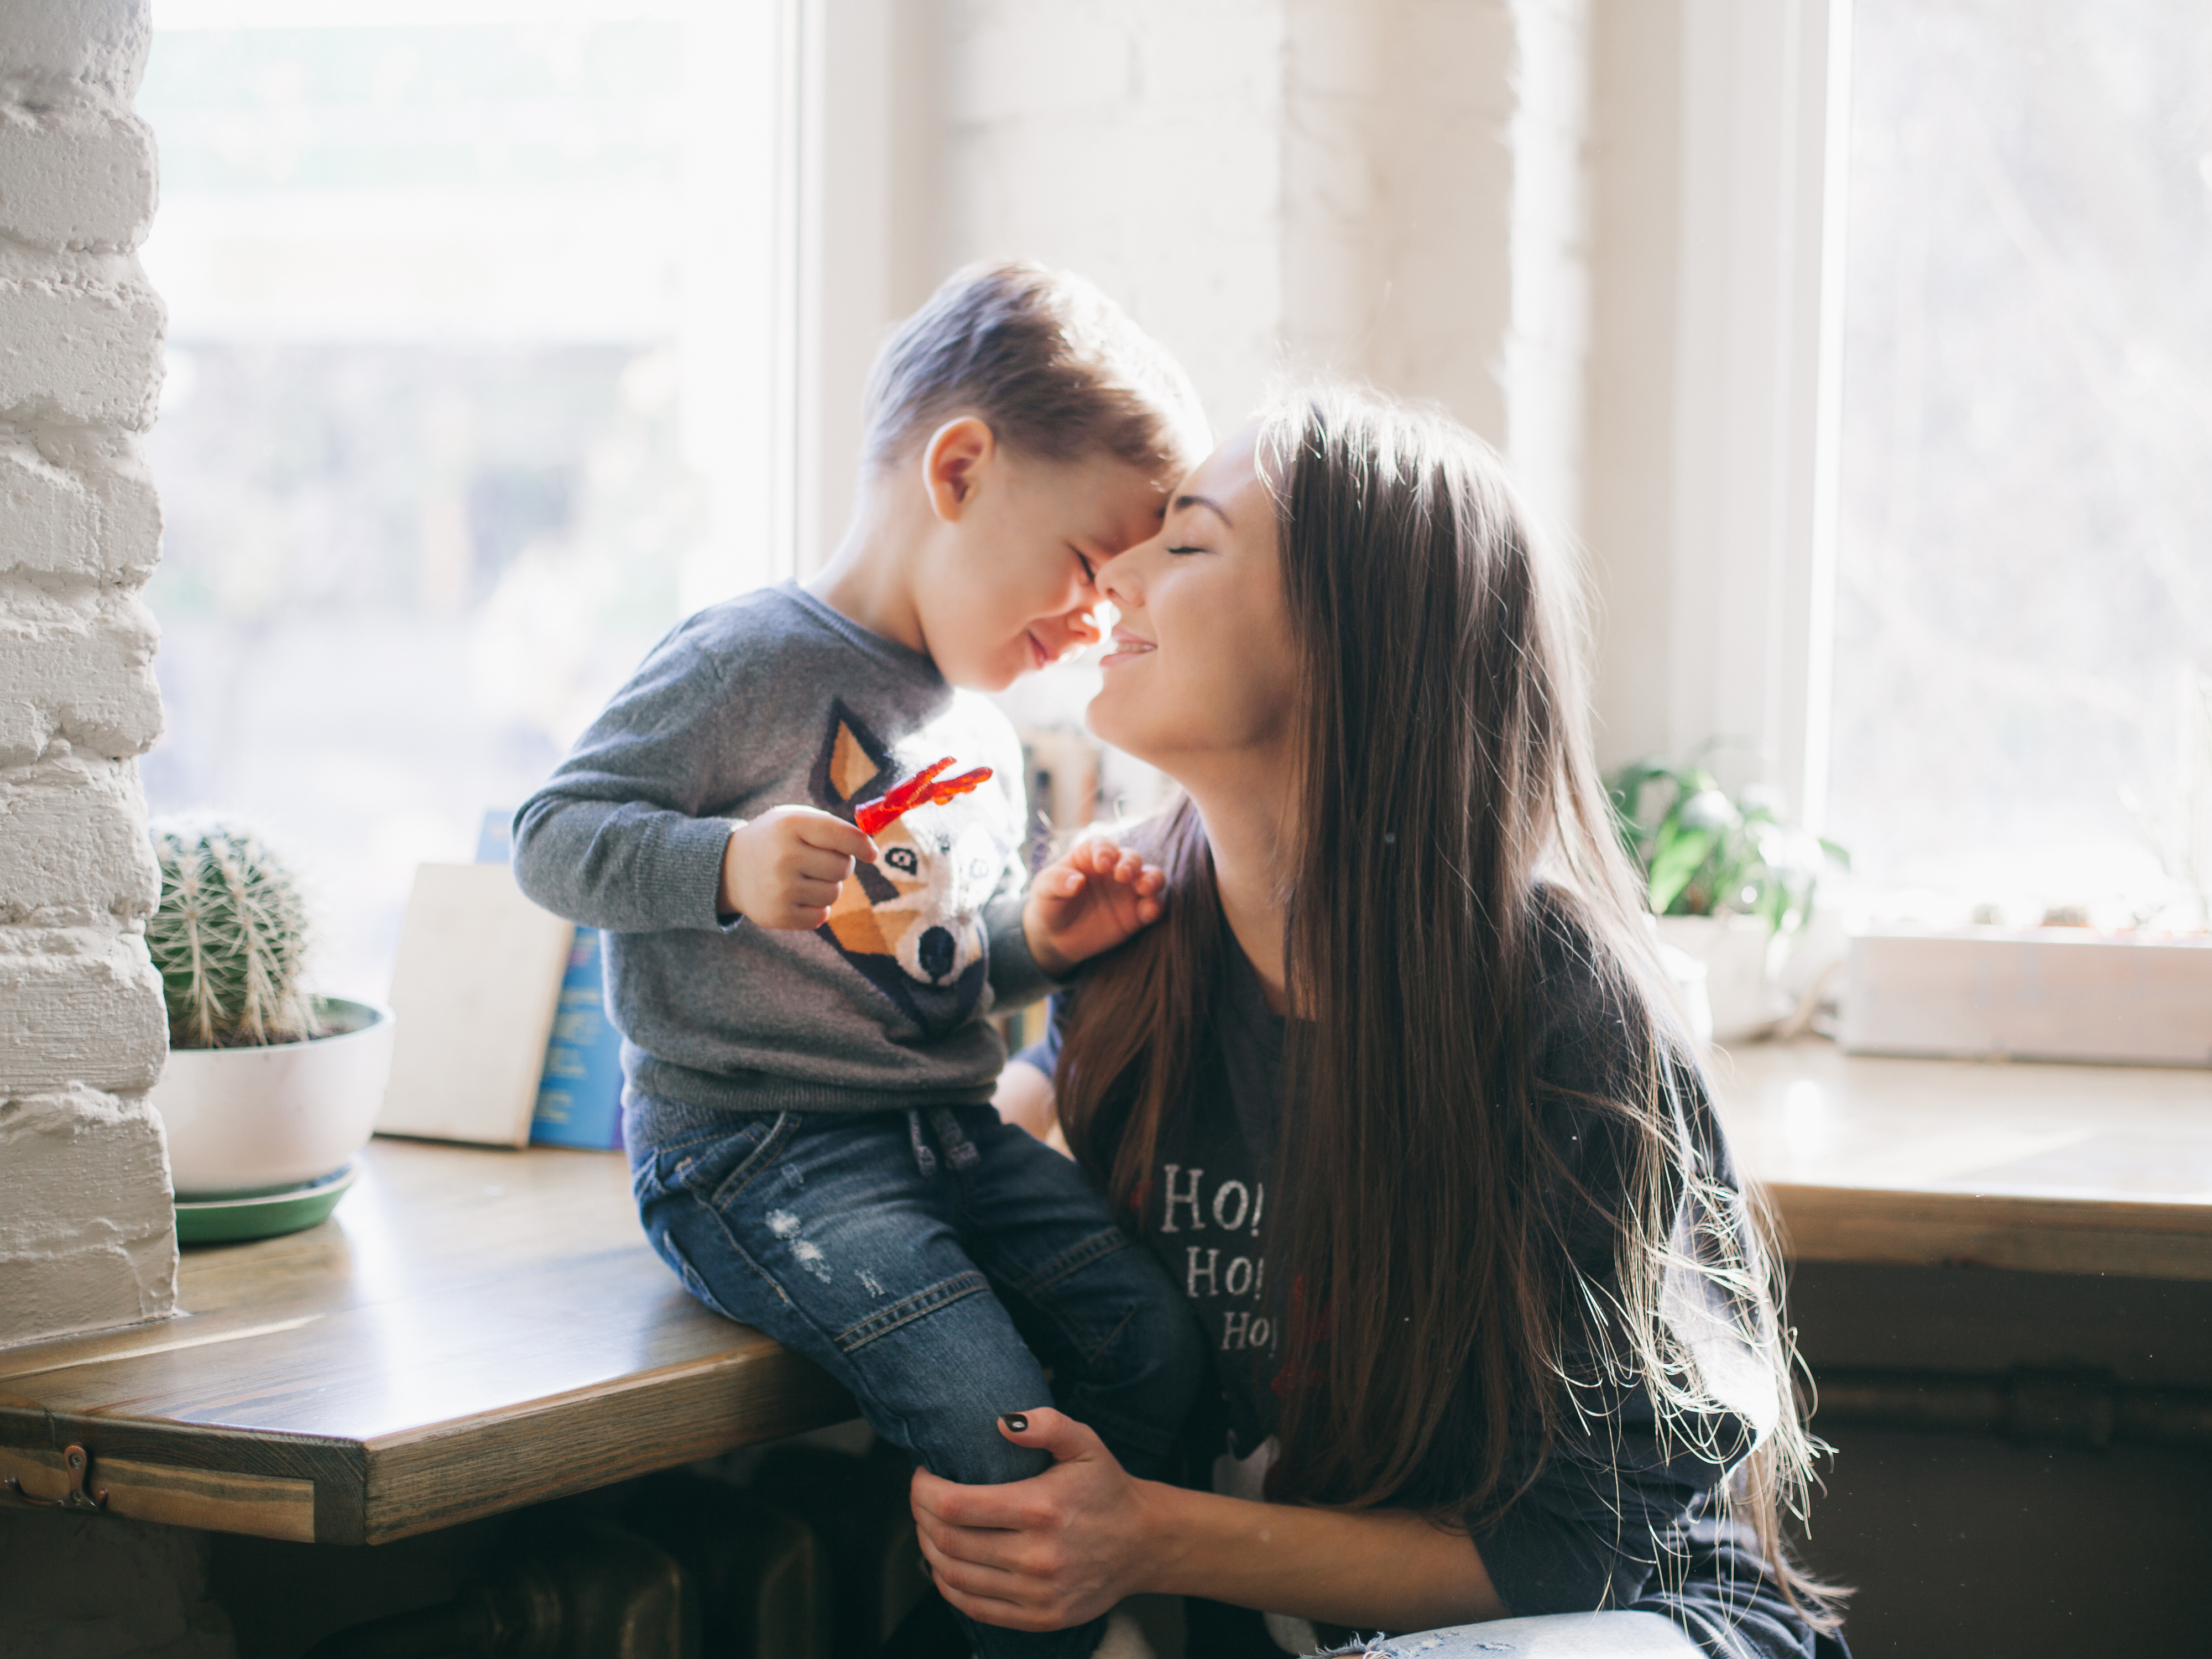 A woman and a little boy sharing a sweet moment by the window | Source: Shutterstock